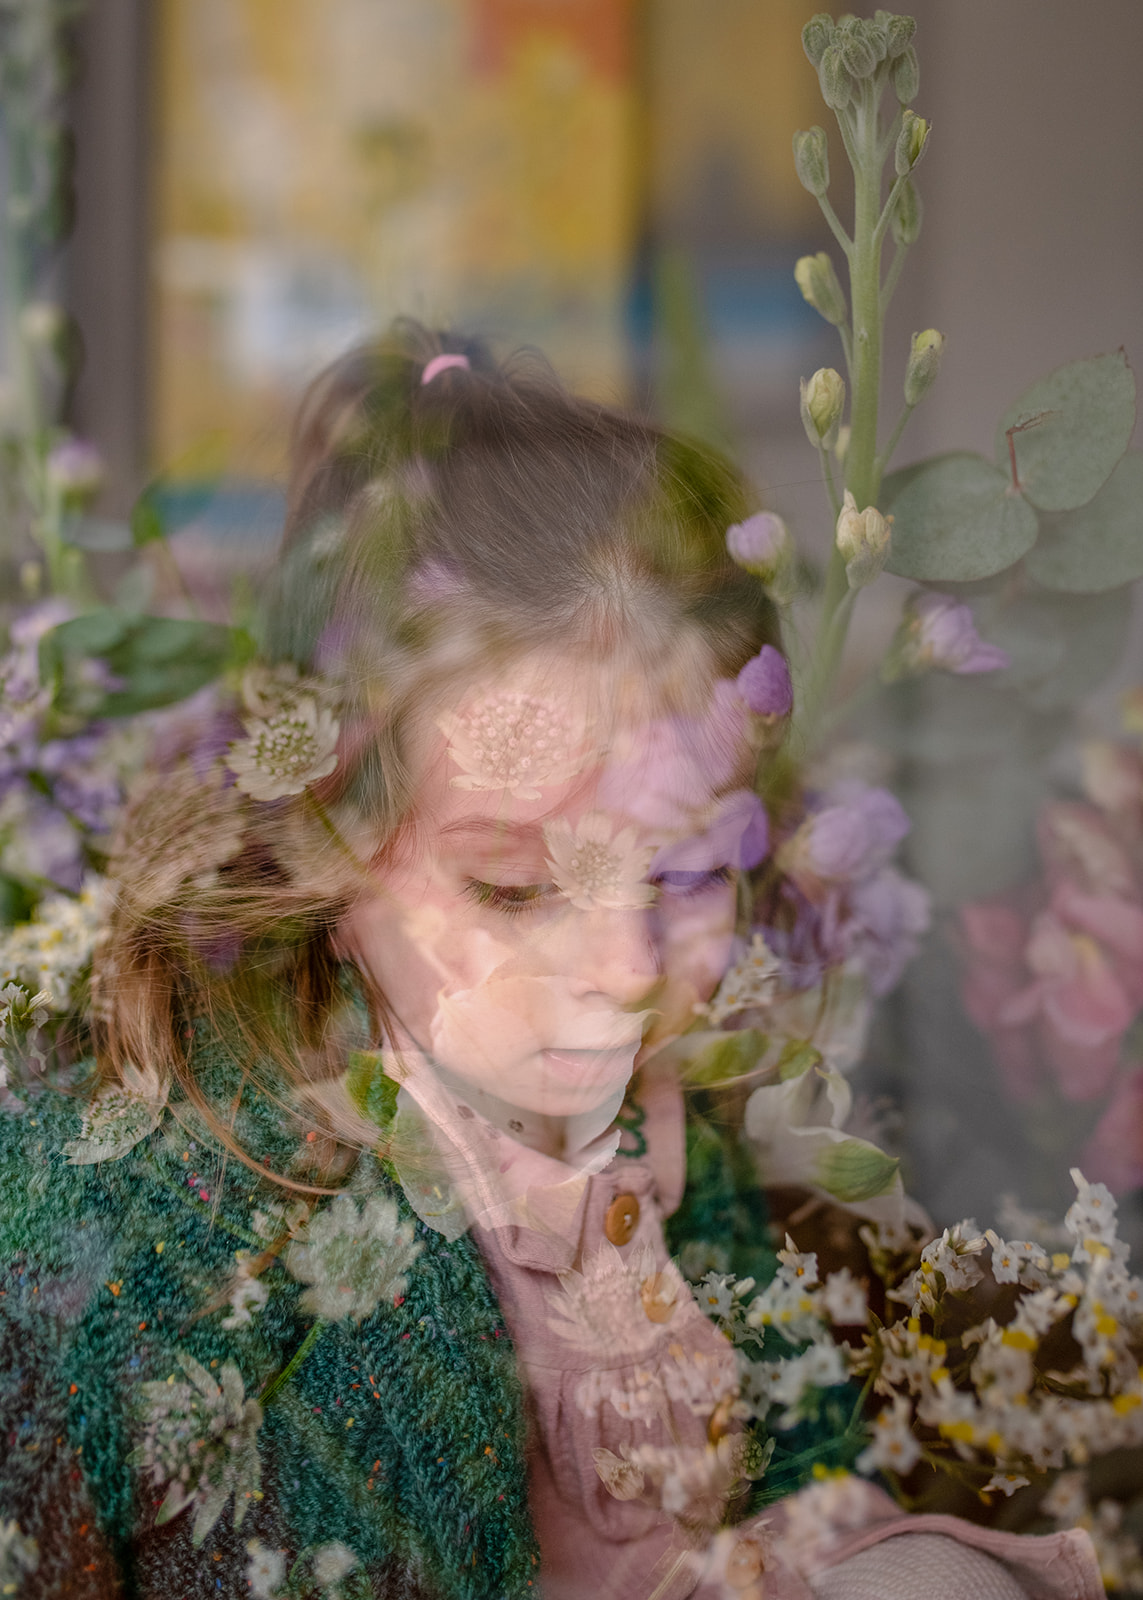 double exposed photograph of a girl and flowers during the natural maternity photography by agi lebiedz